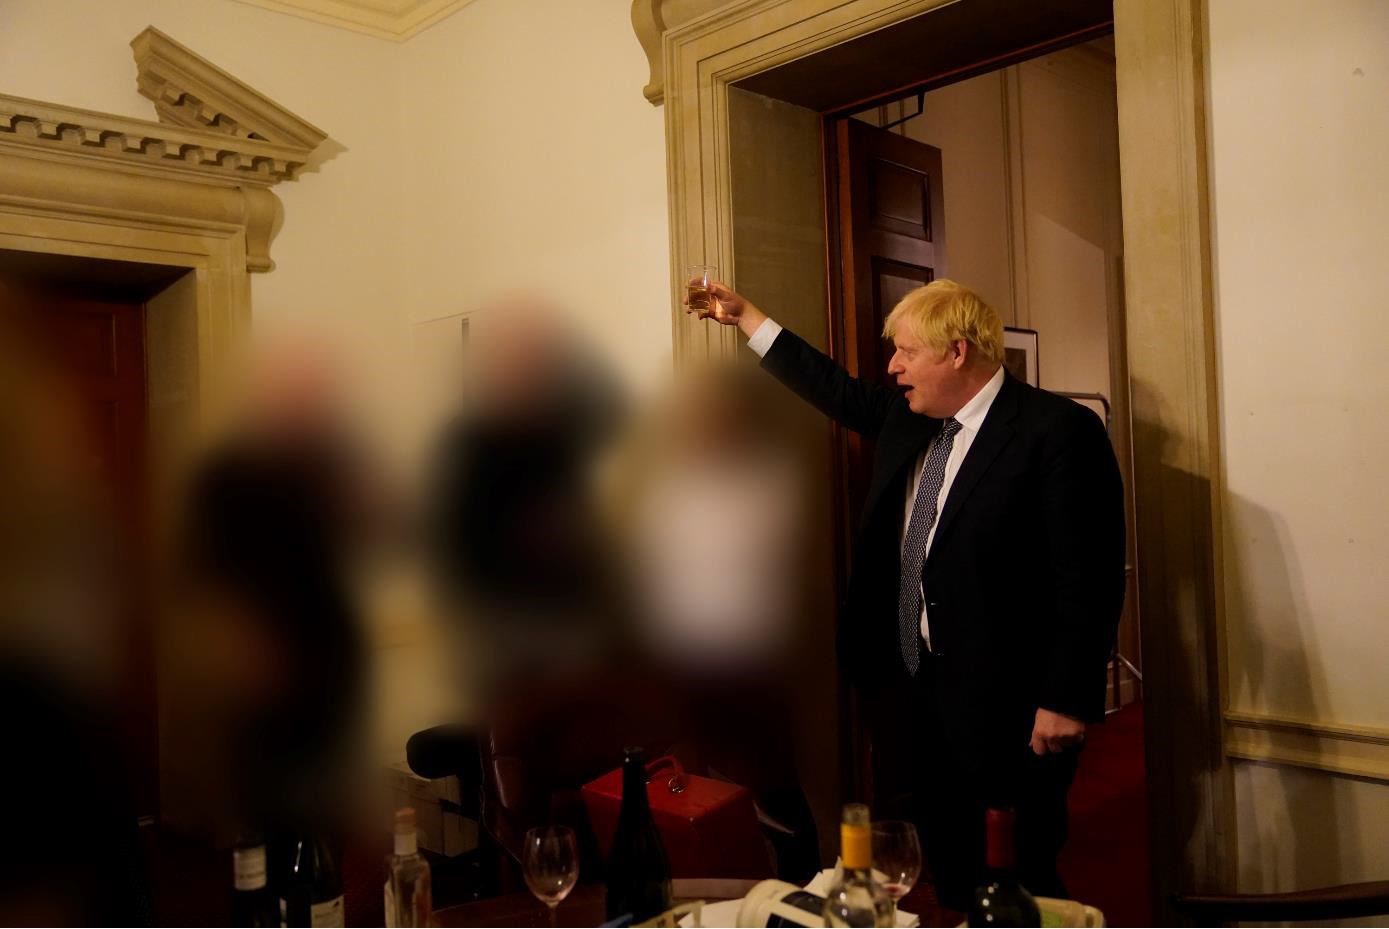 Boris Johnson pictured at a lockdown-busting gathering in No 10 for the departure of a special adviser (Sue Gray Report/Cabinet Office/PA)